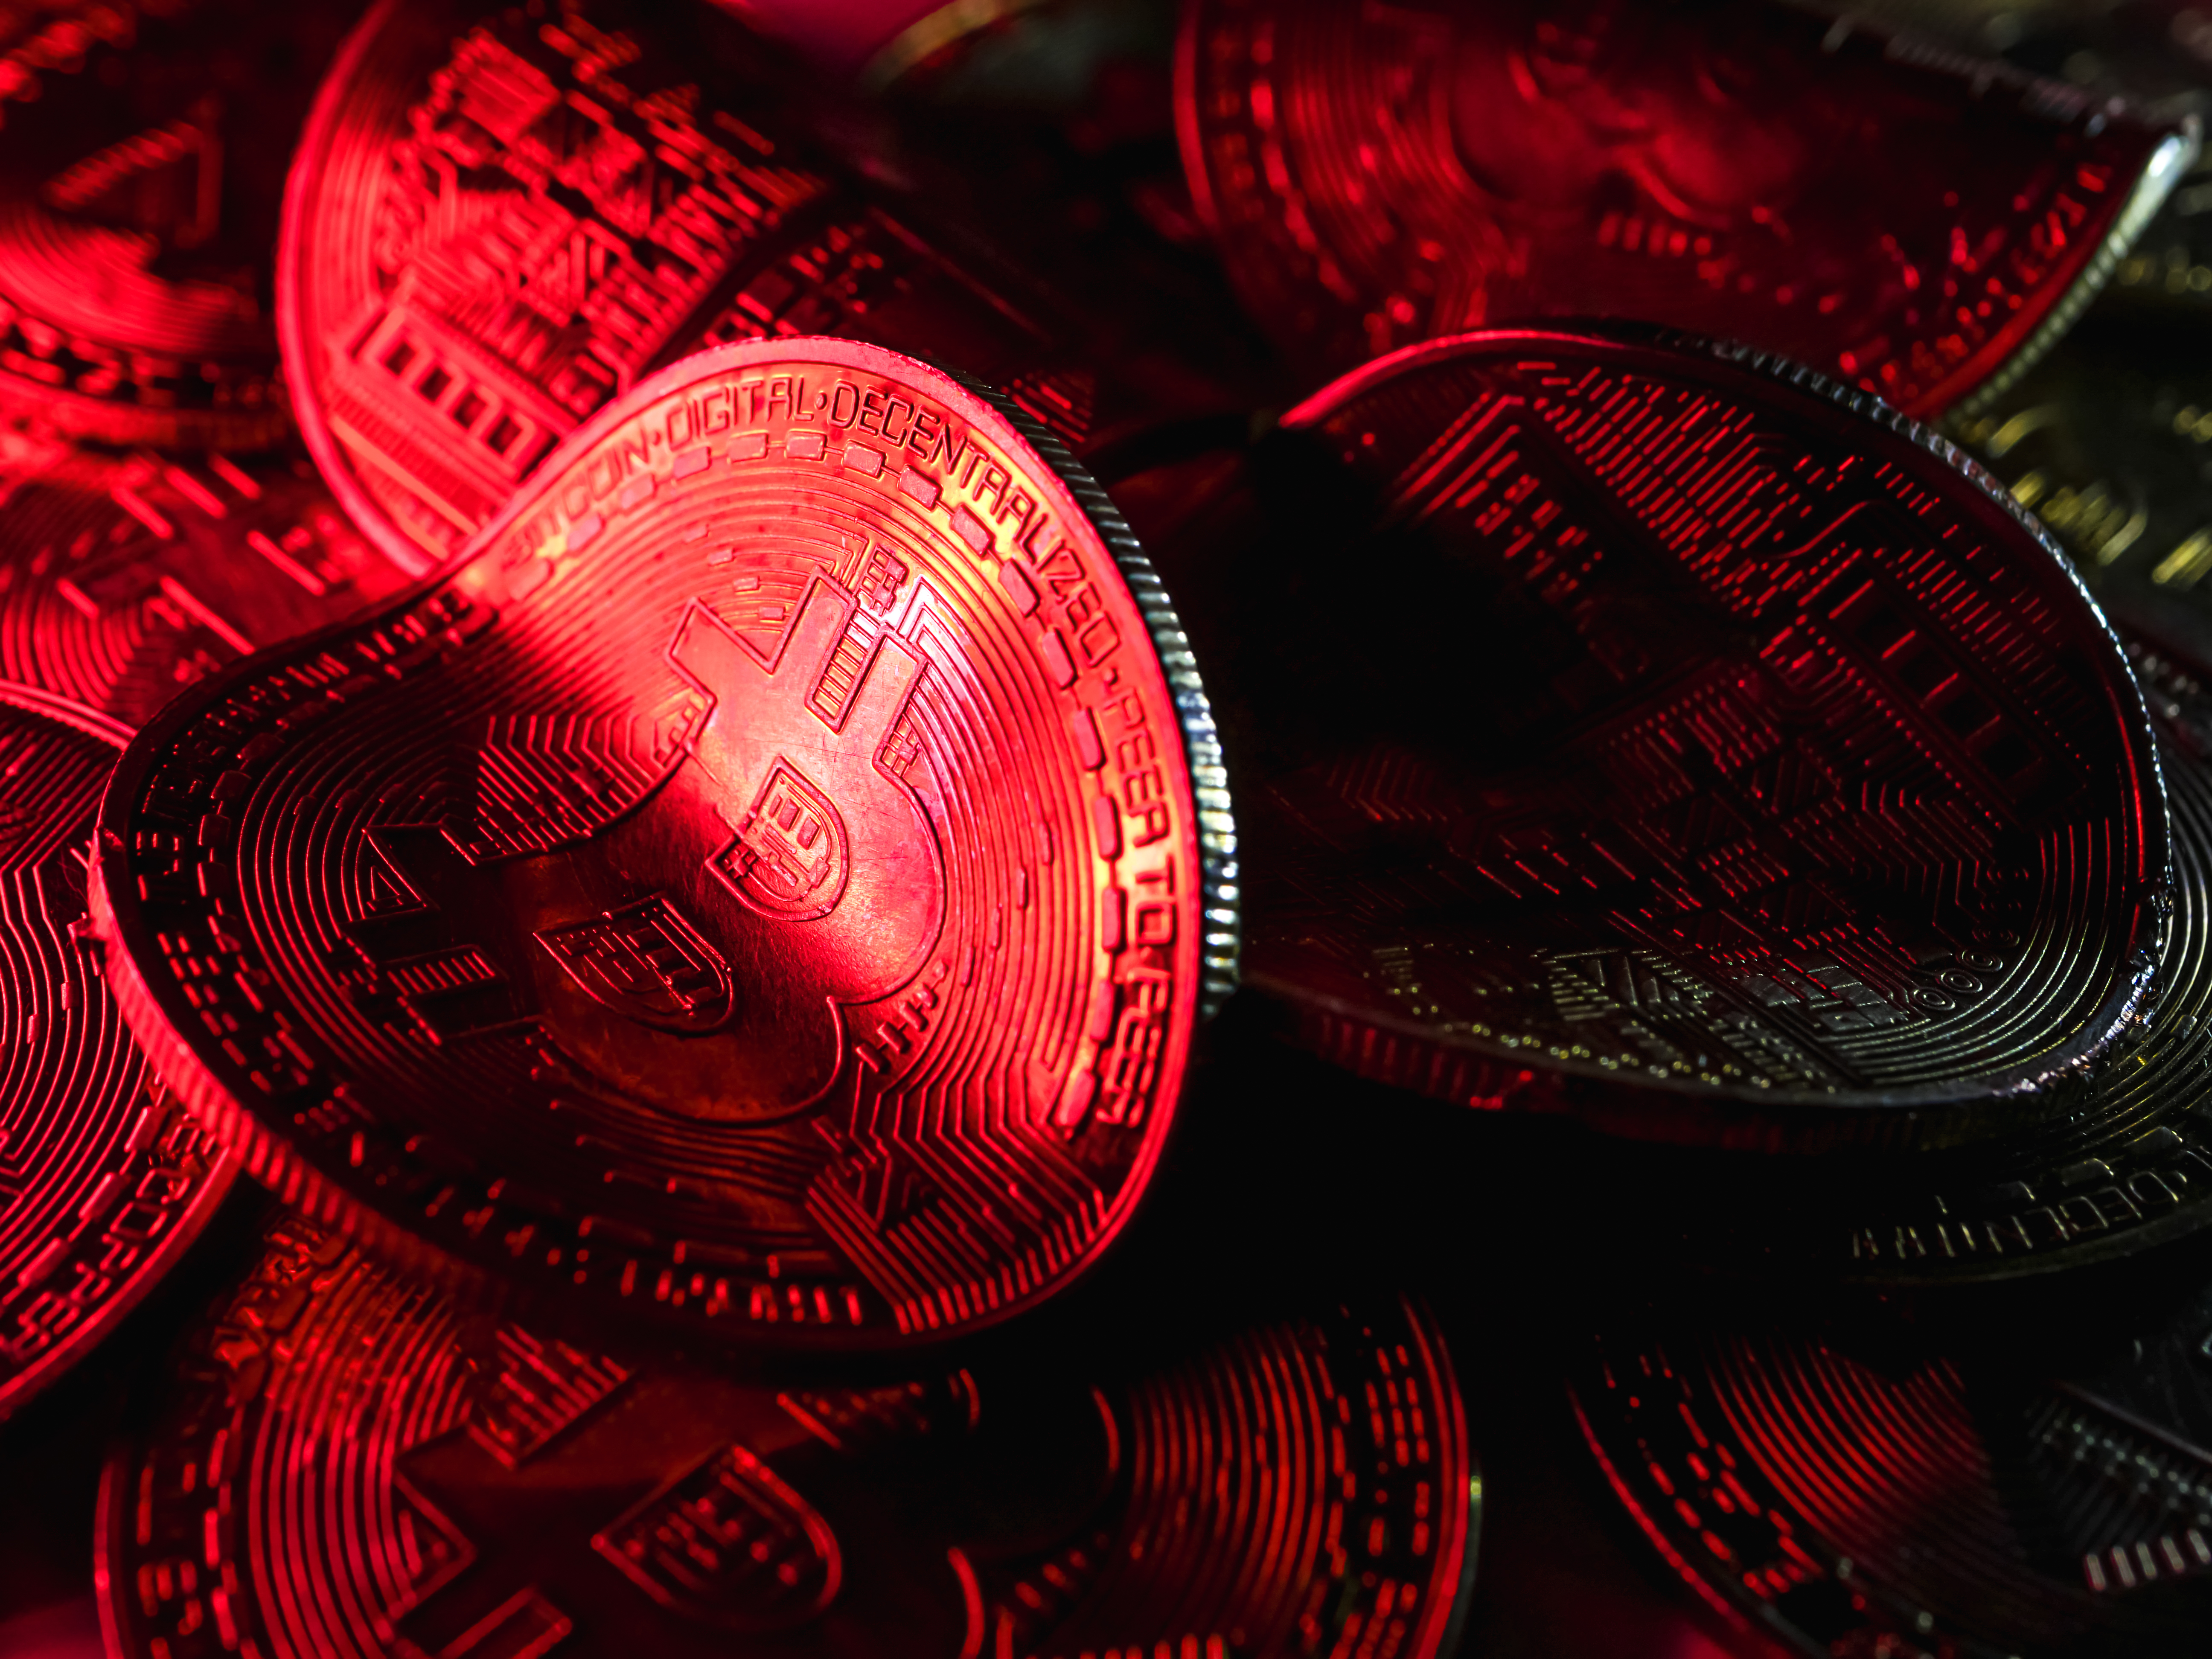 Twisted physical bitcoins under red light